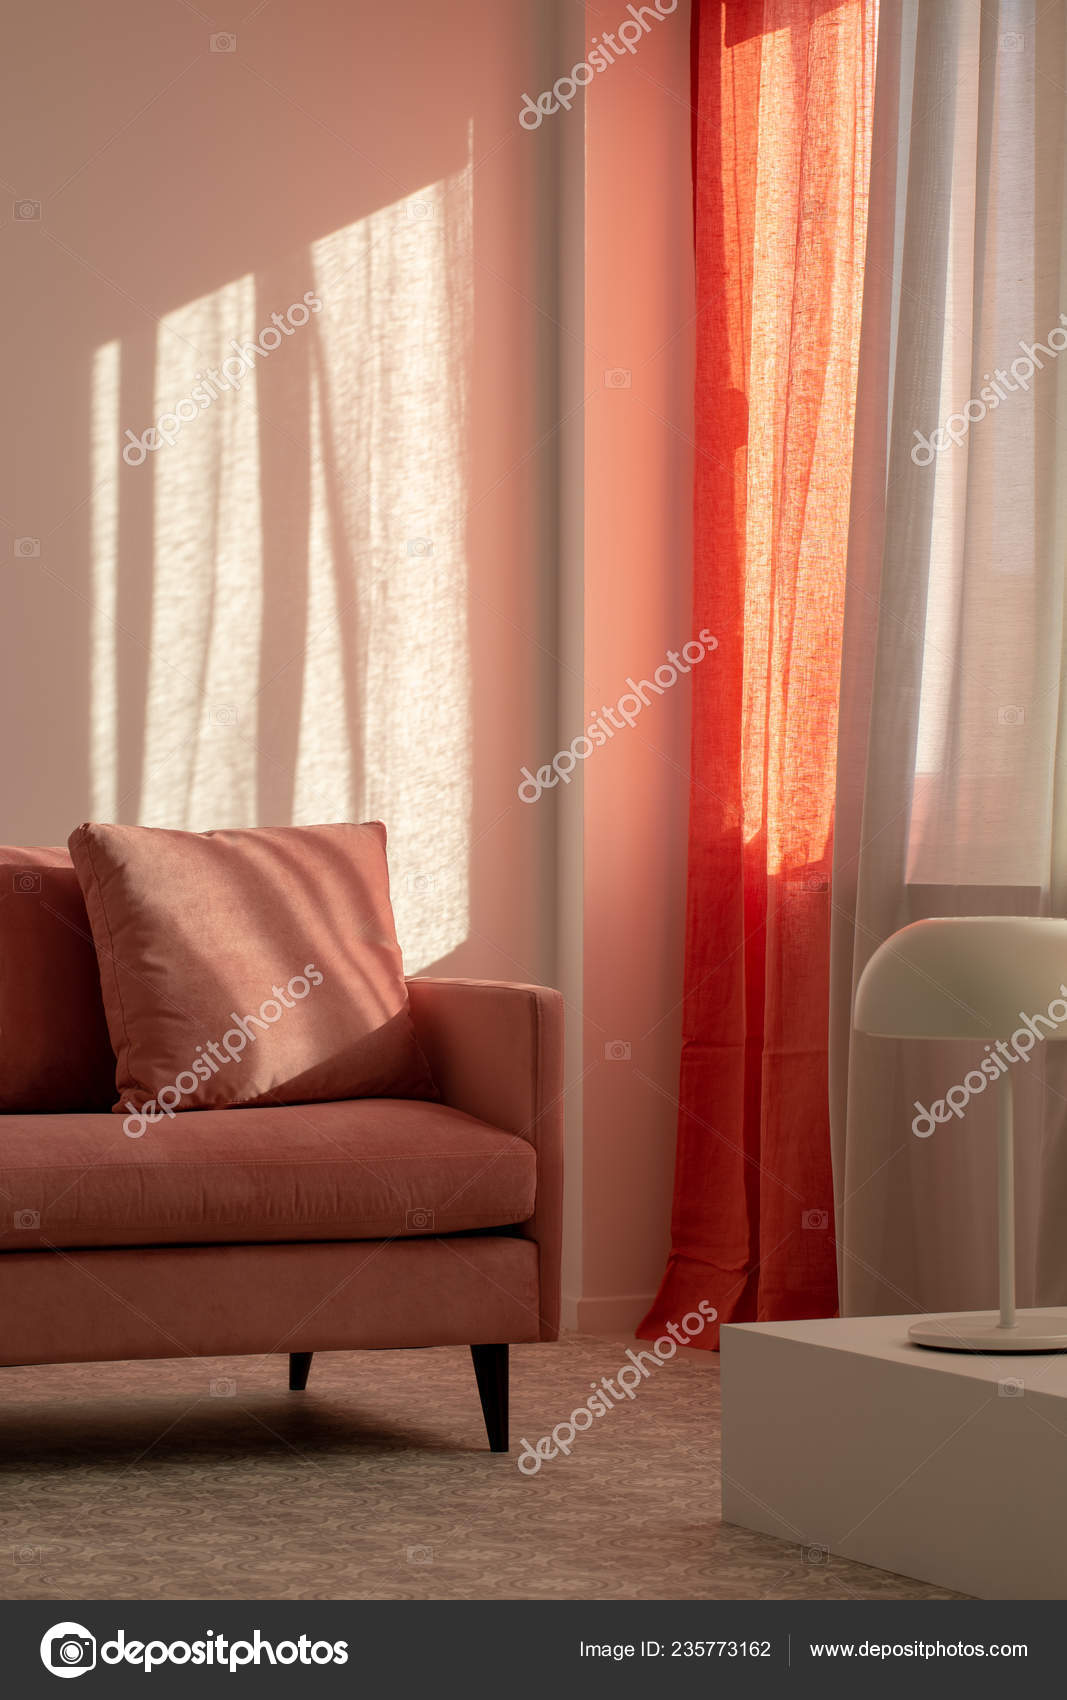 Pastel Pink Couch White Living Room Interior Orange Curtain Industrial Stock Photo Photographeeeu 235773162